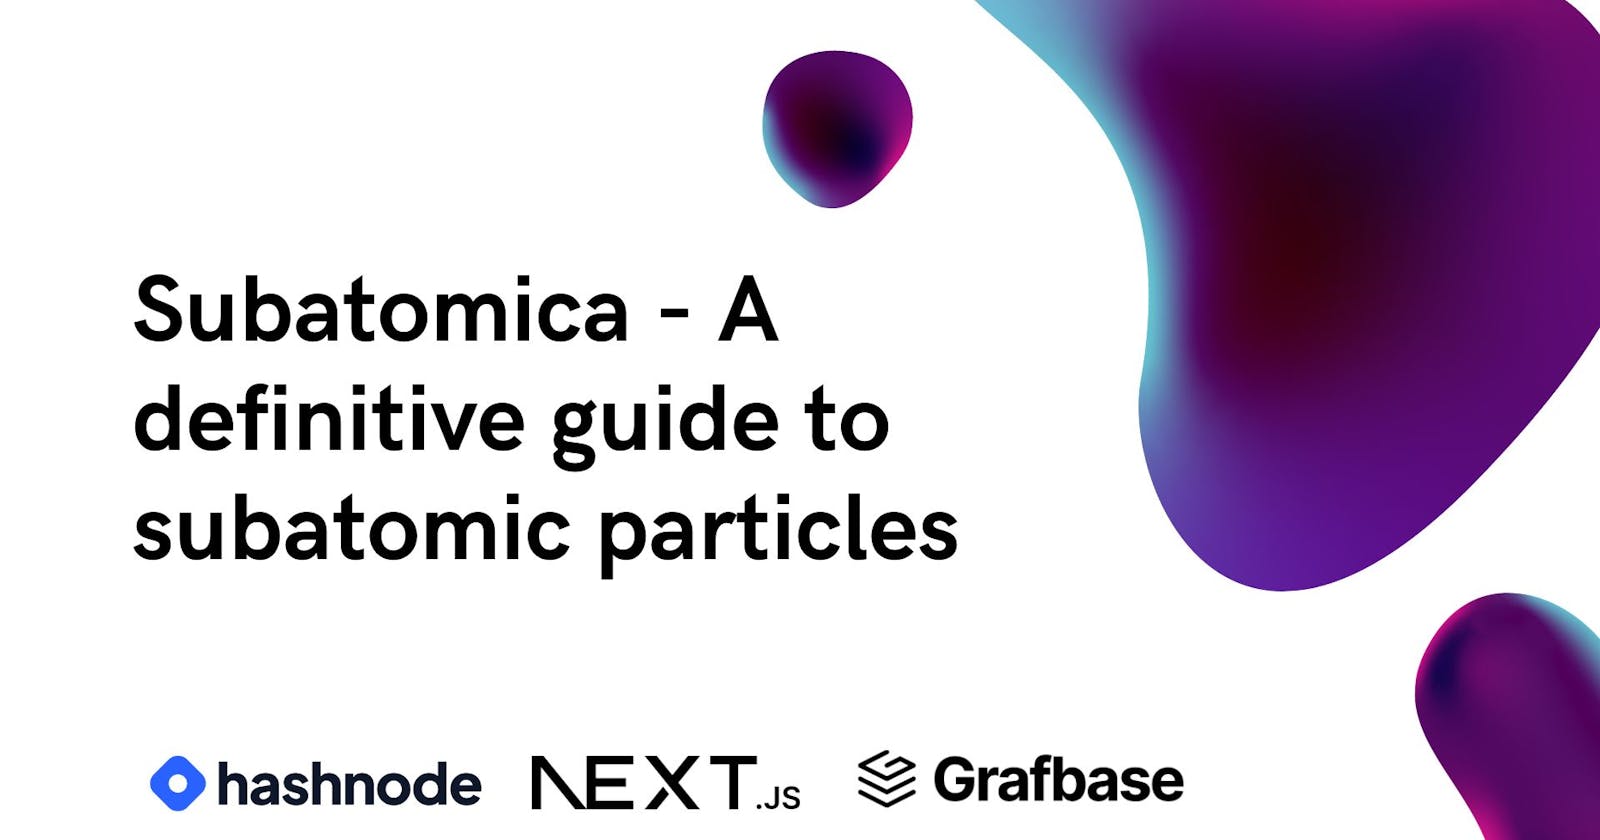 Subatomica: A definitive guide to subatomic particles